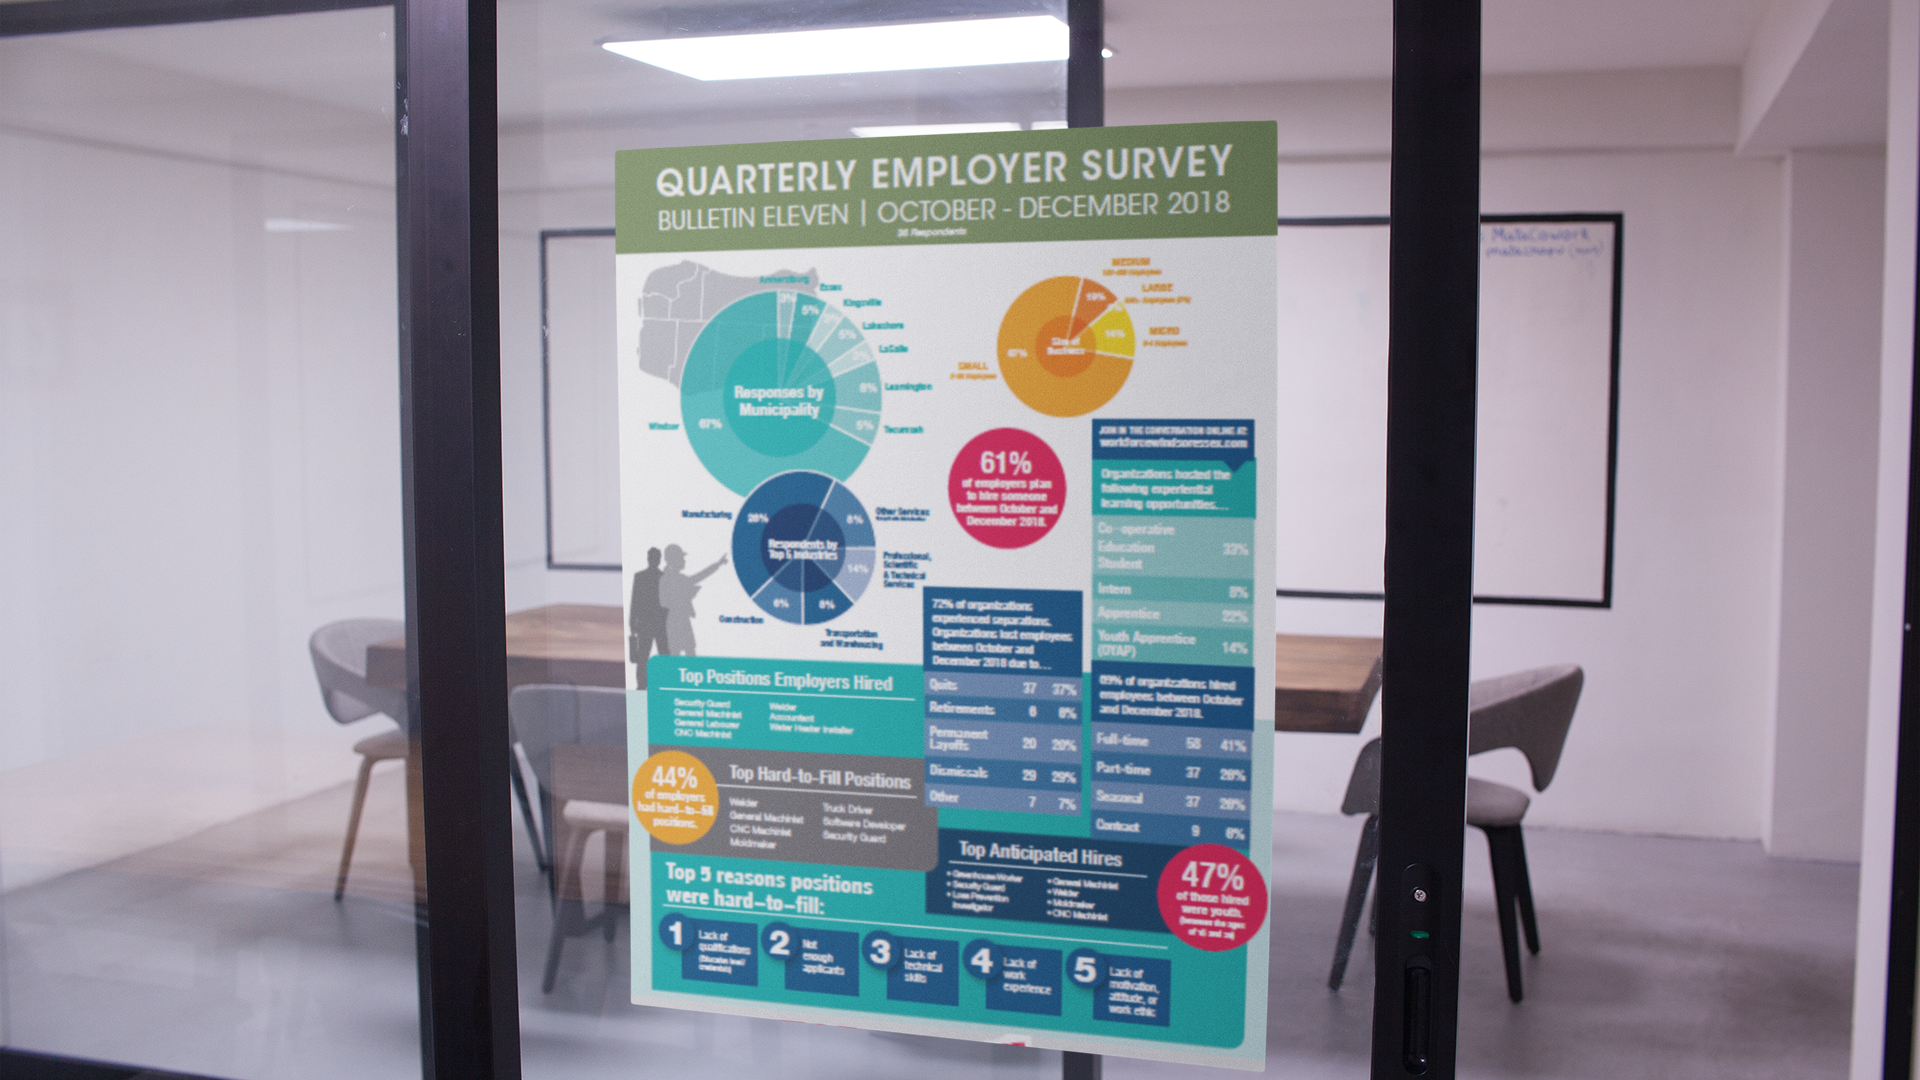 Quarterly Employer Survey poster on glass wall